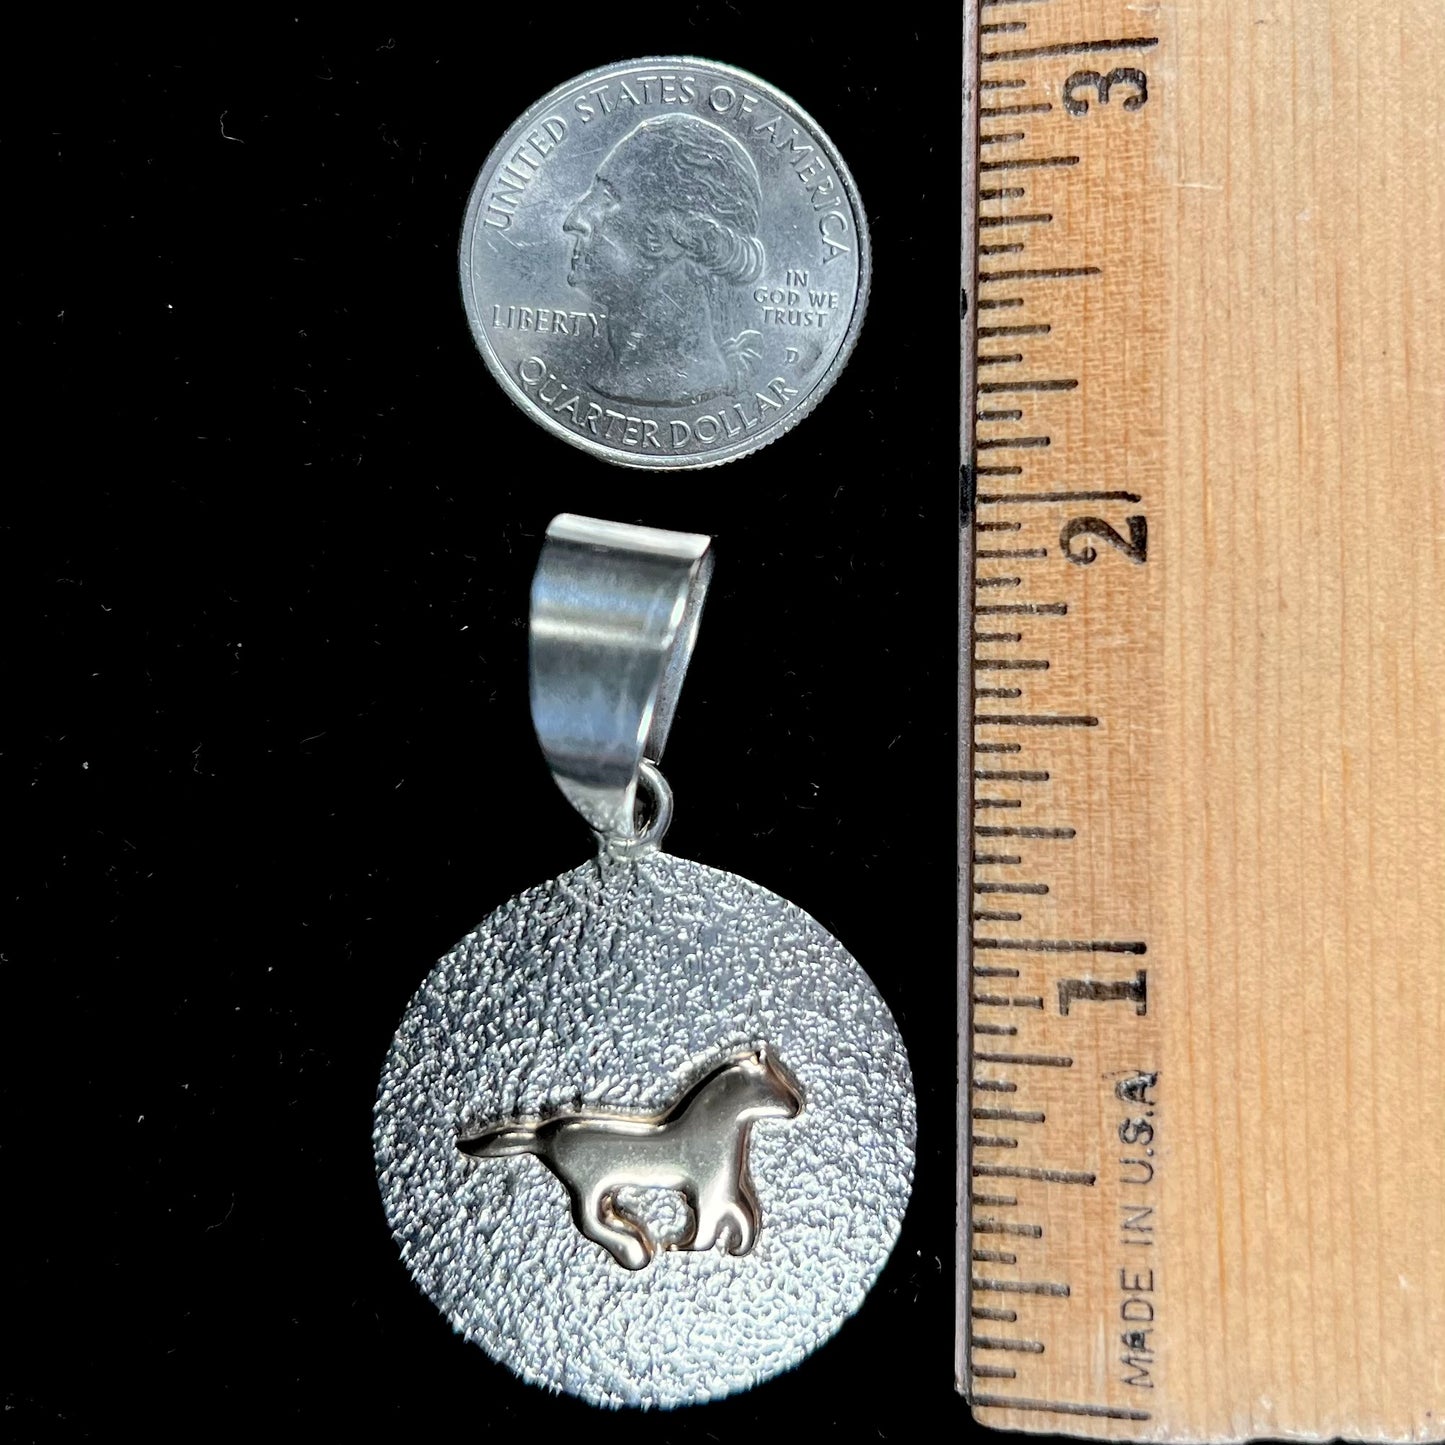 A Navajo-made sterling silver pendant depicting a yellow gold horse galloping.